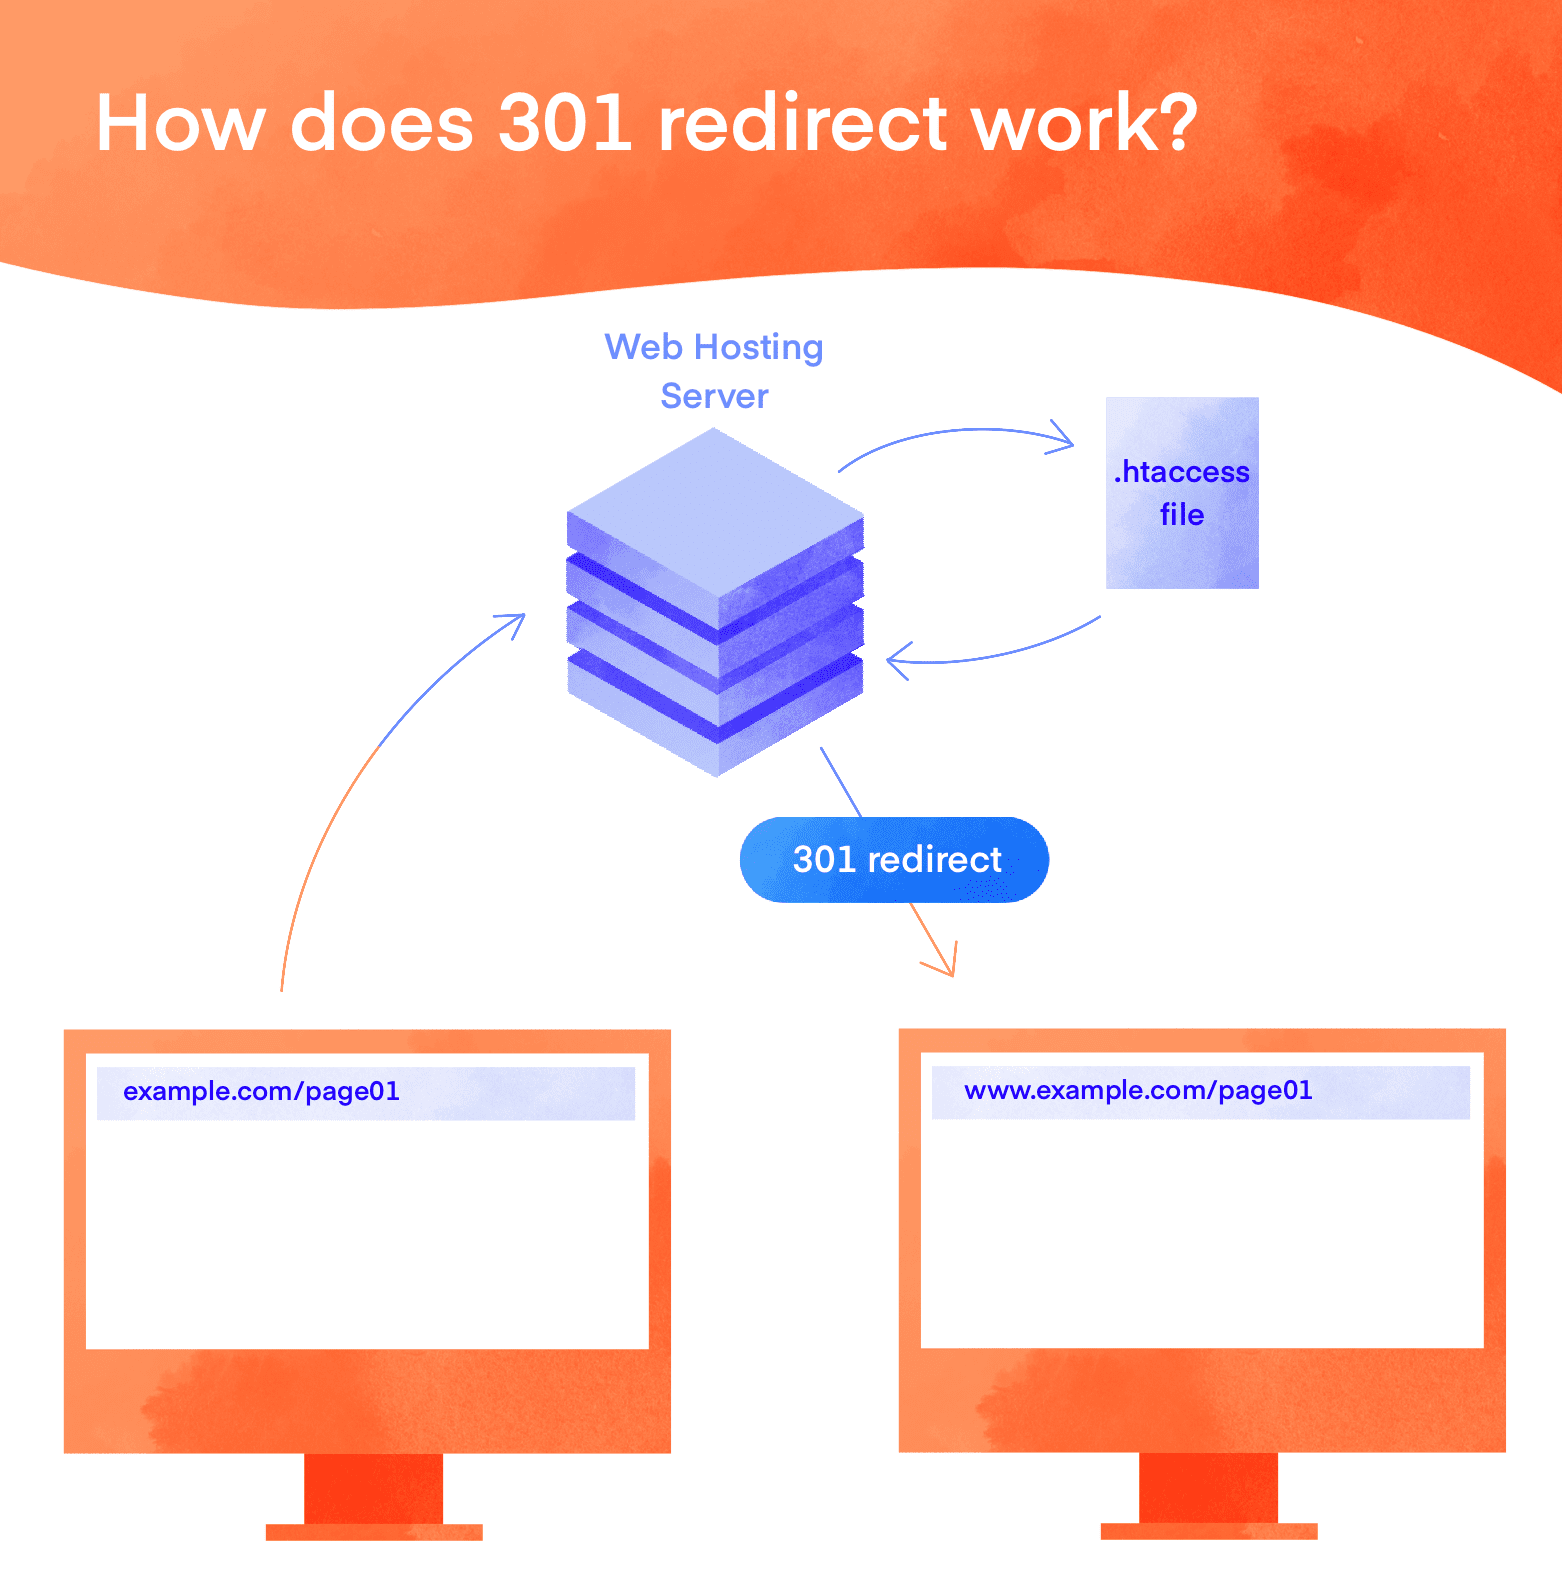 How does 301 redirect work?